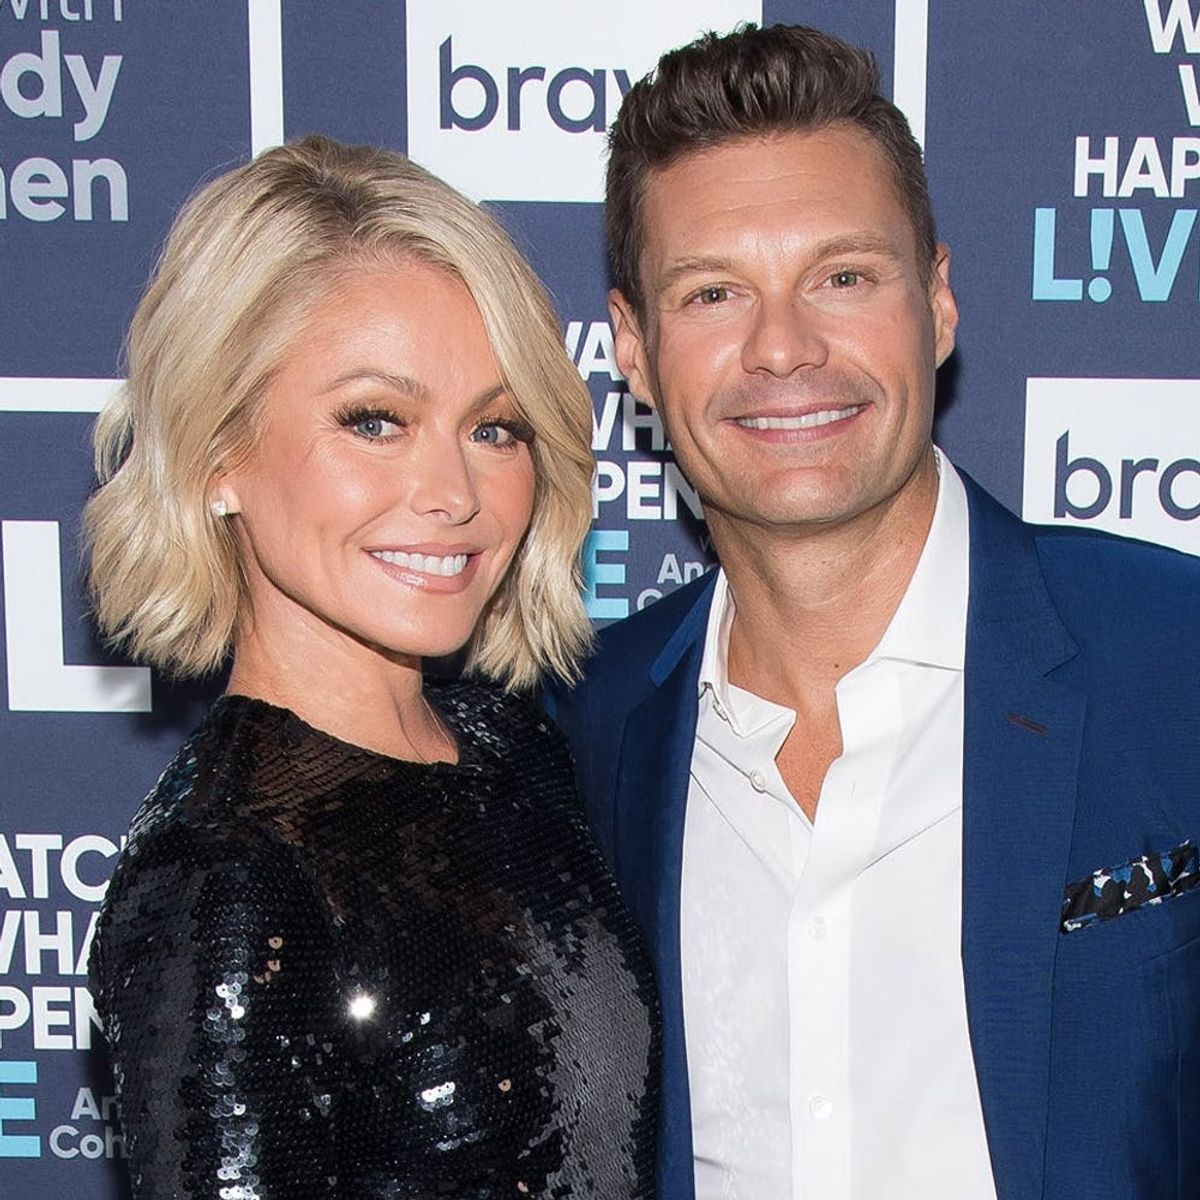 Kelly Ripa and Ryan Seacrest Face Off As “Game of Thrones” Enemies for Halloween Special